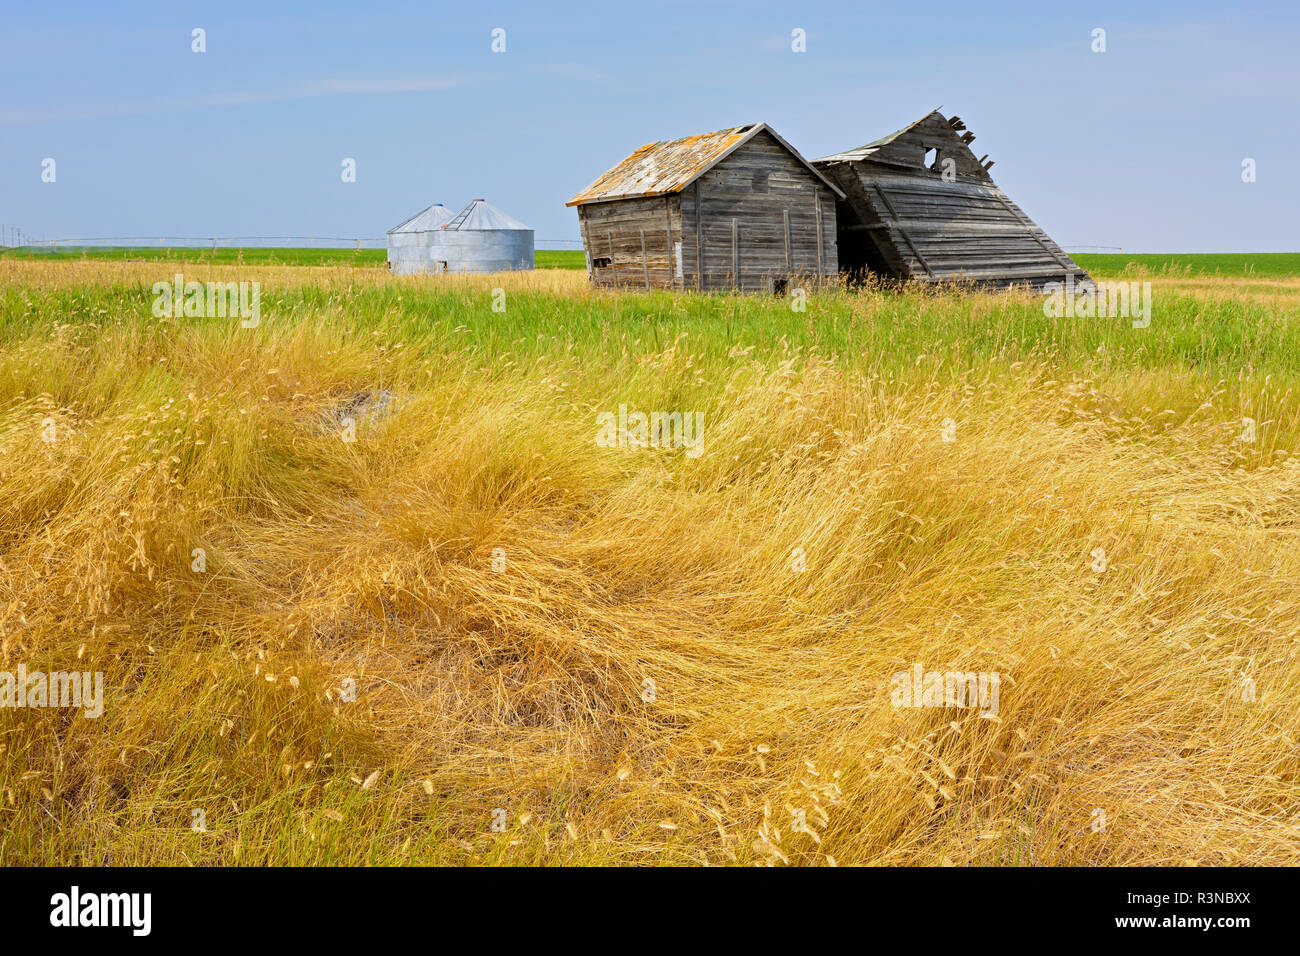 Canada, Alberta. Wooden granaries contrasted with new metal ones. Stock Photo